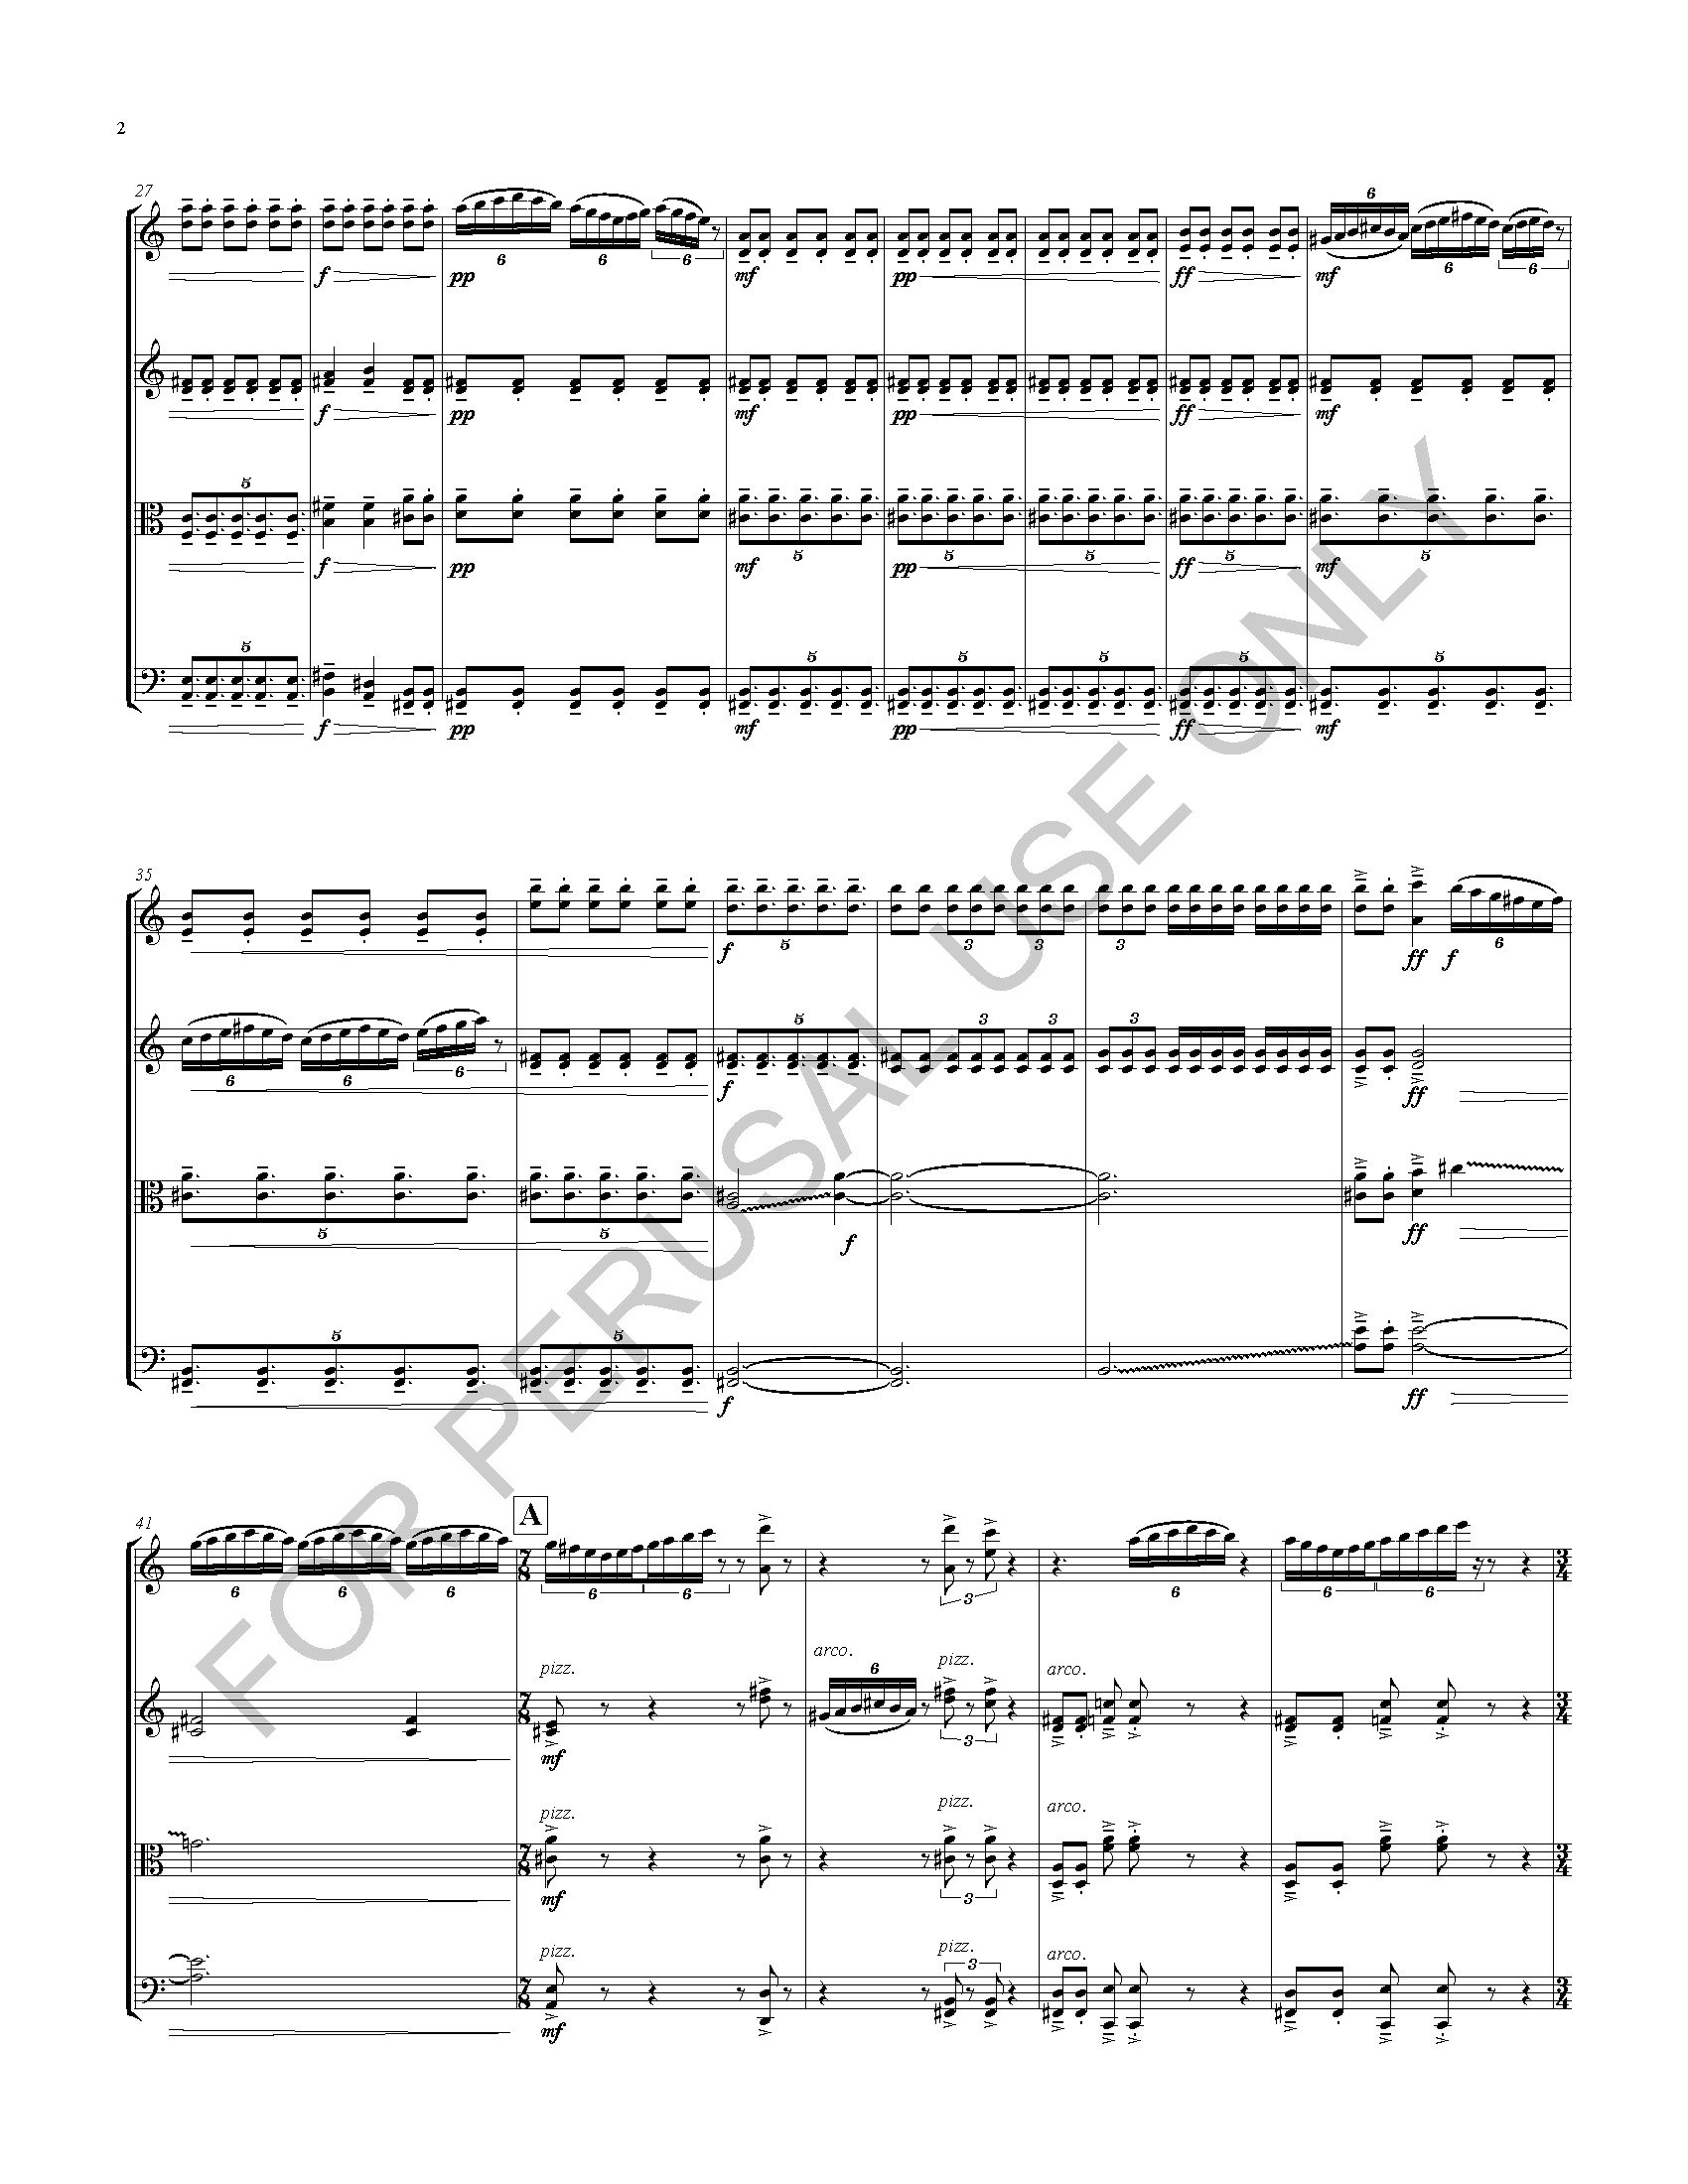 REFERENCE Smear Music (Full Score)_Page_02.jpg